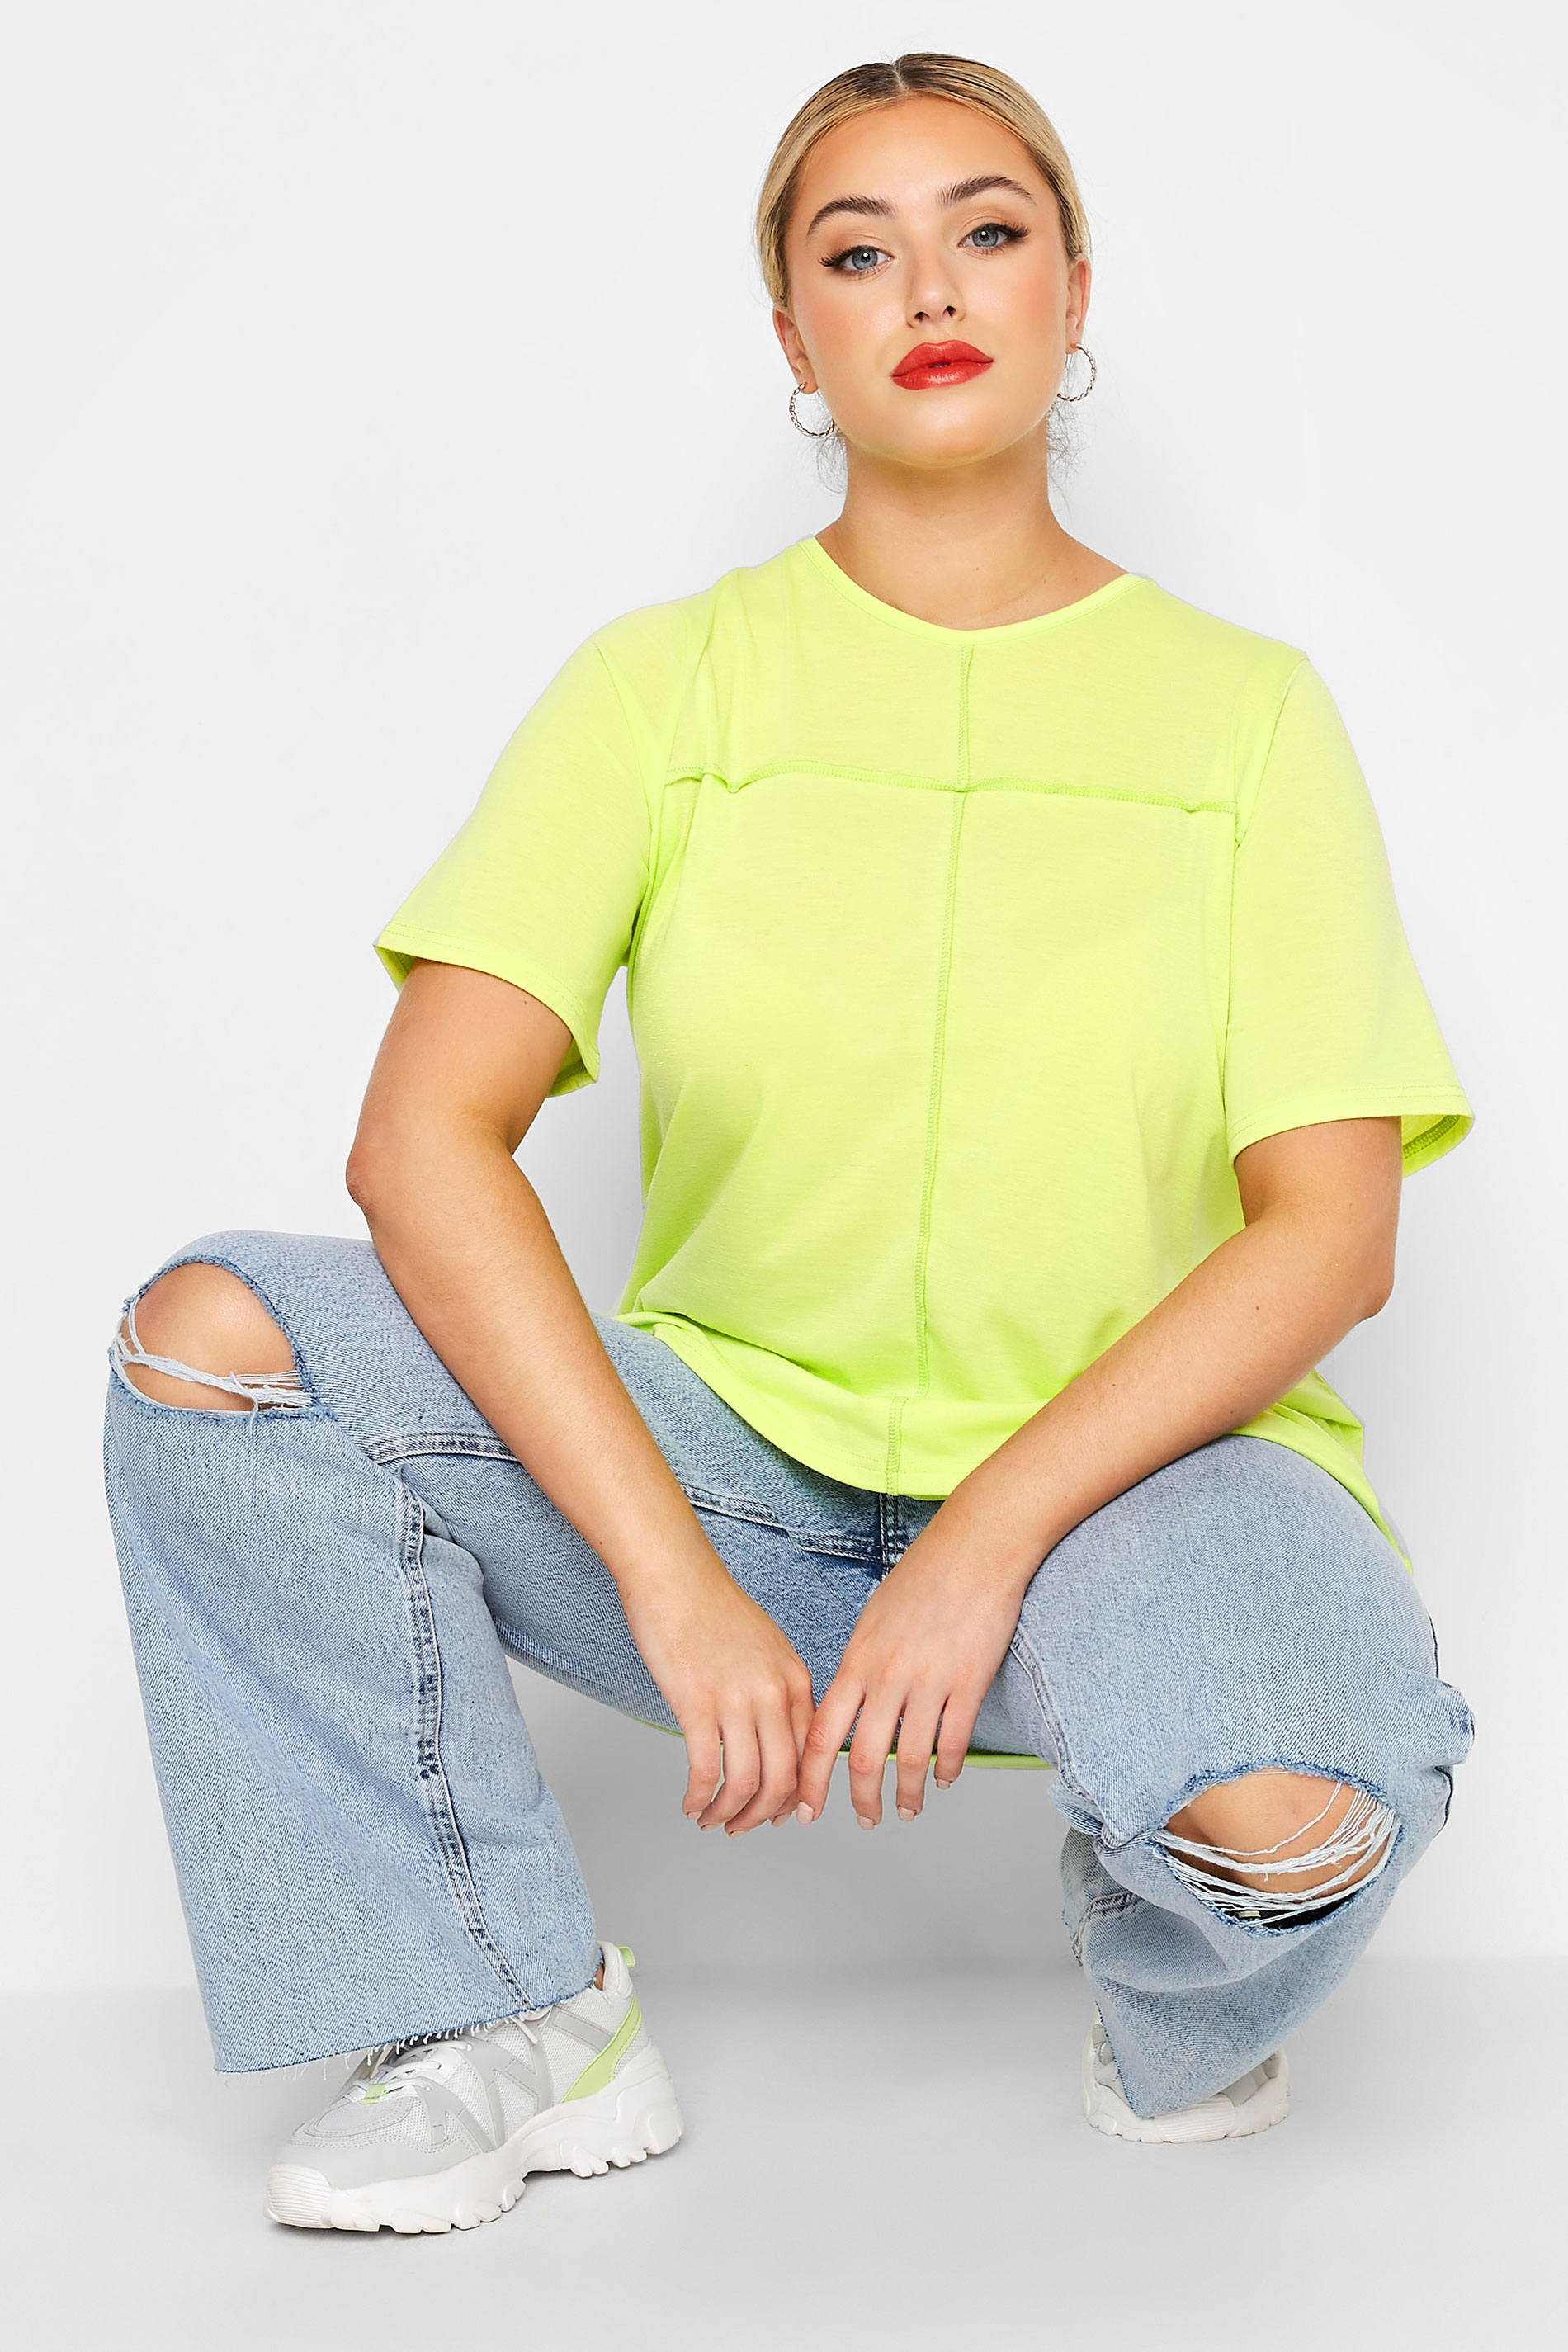 Grande taille  Tops Grande taille  T-Shirts | LIMITED COLLECTION - T-Shirt Vert Citron Couture en Jersey - IX76147